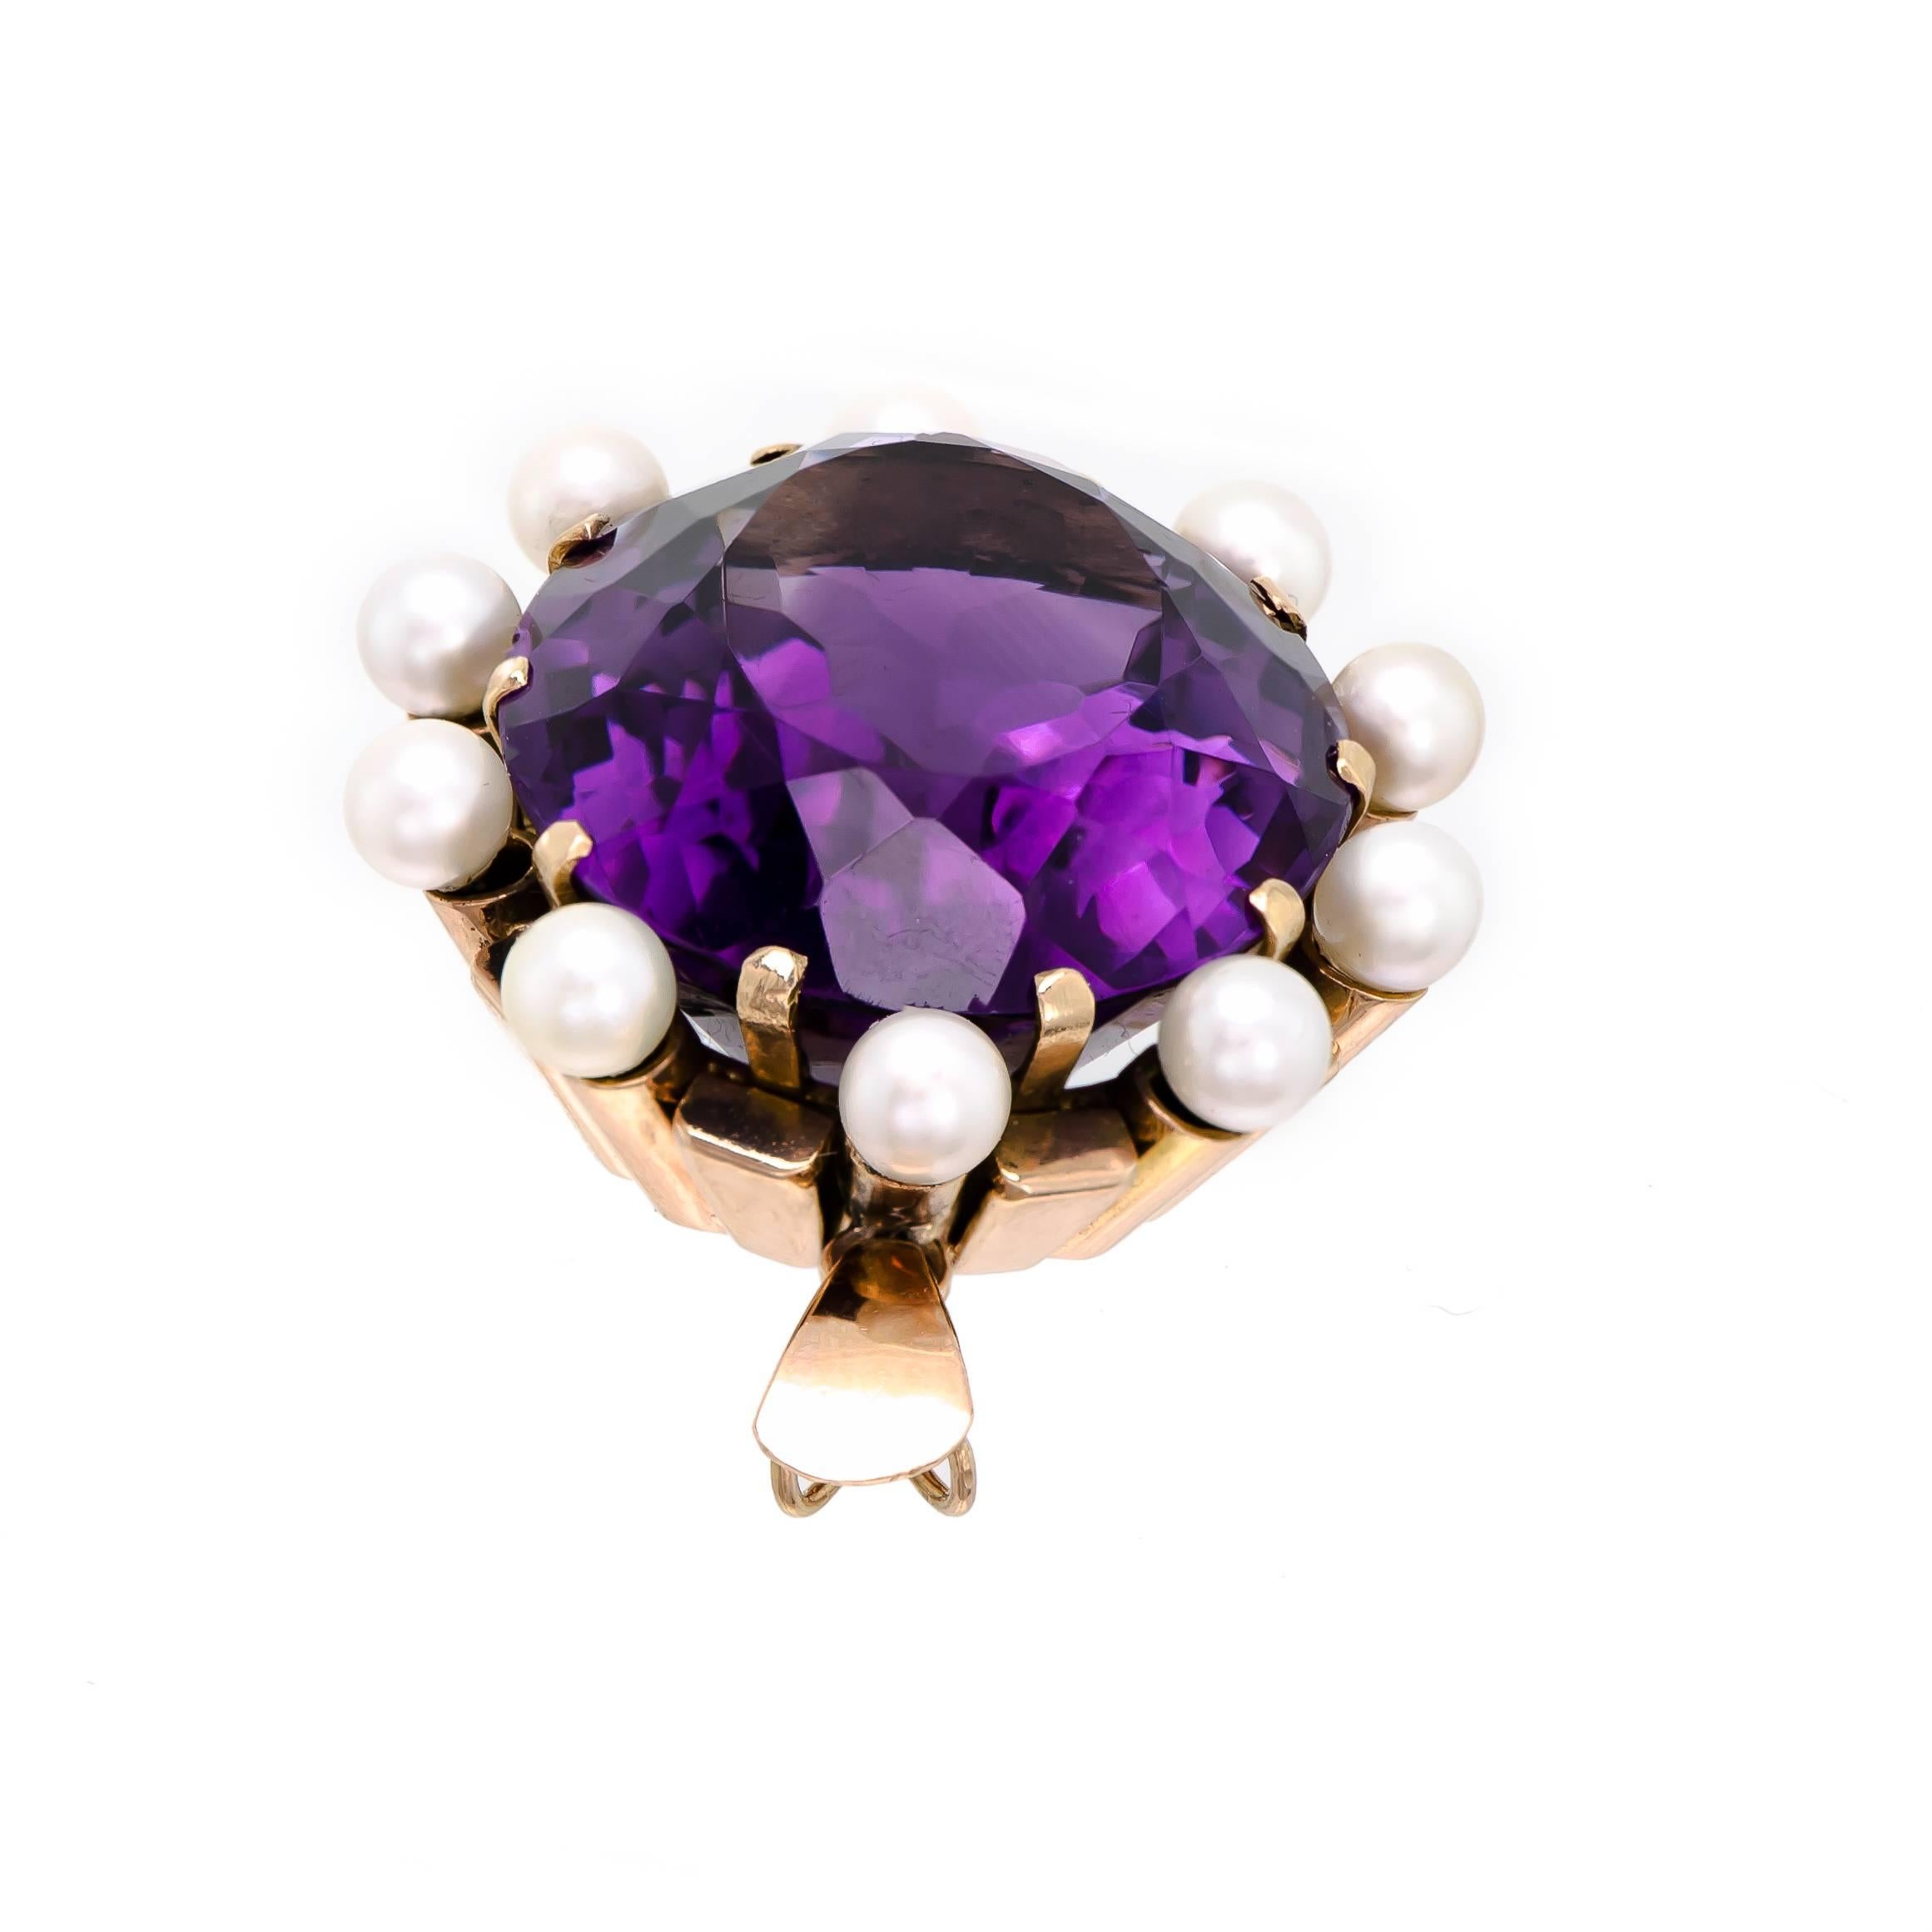 Stunning Large Retro Amethyst and Cultured Pearl 14 Karat Rose Gold Pendant In Excellent Condition For Sale In Lombard, IL